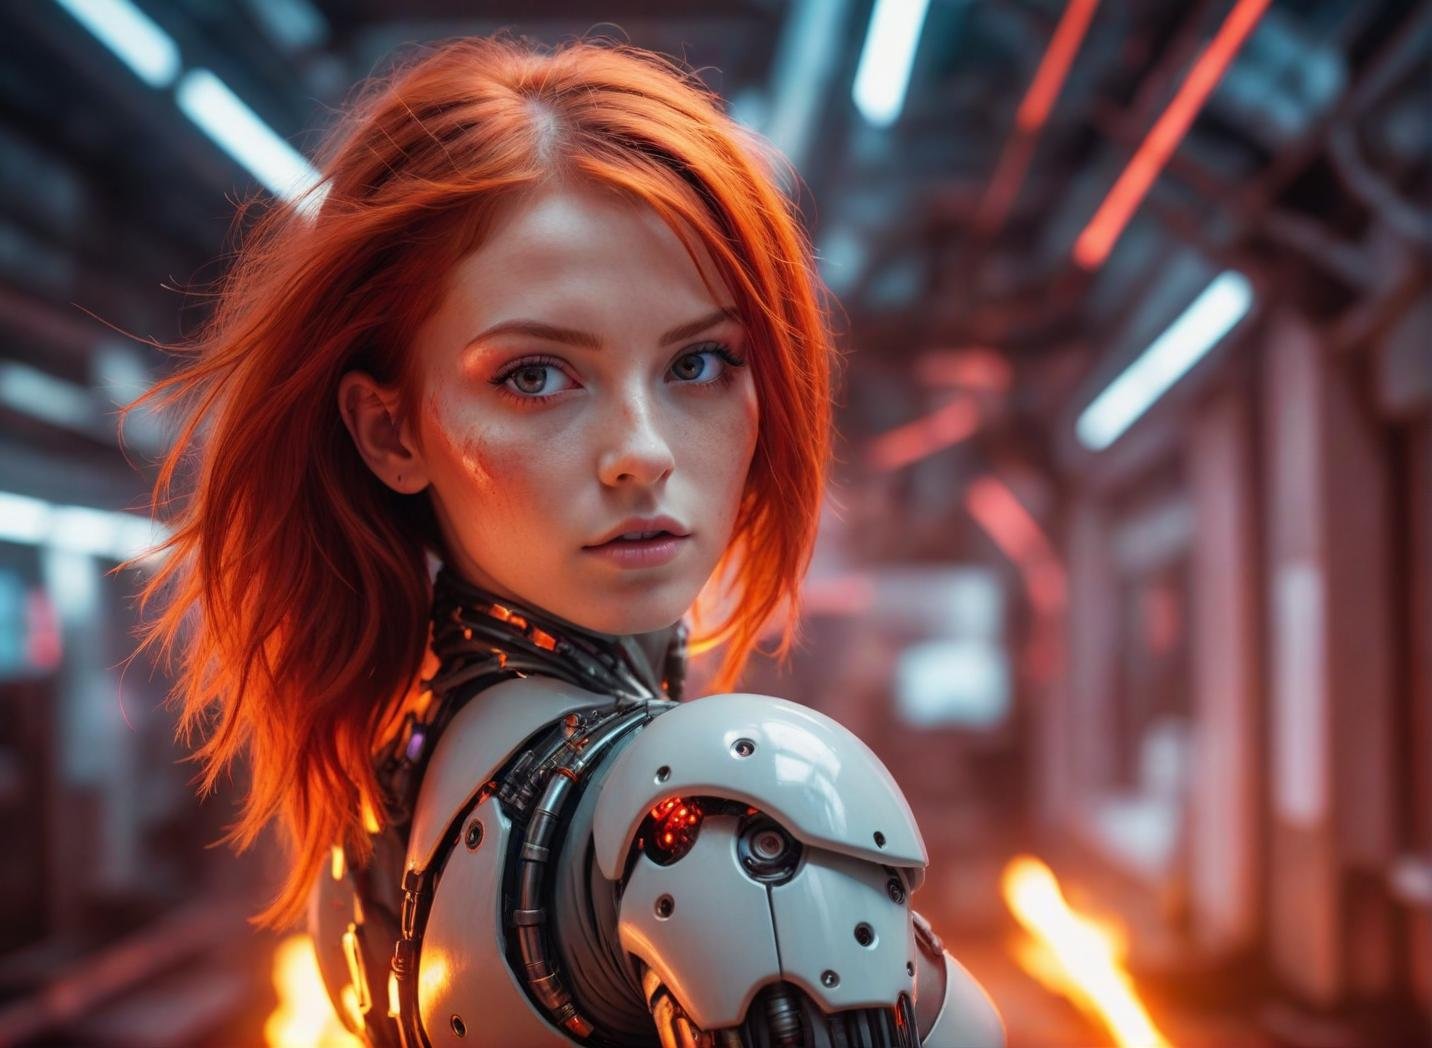 A Photograph capturing the essence of a young cyborg woman with fiery red hair. Her face fills the frame, bathed in neon hues, exuding determination and mystery amidst a futuristic backdrop